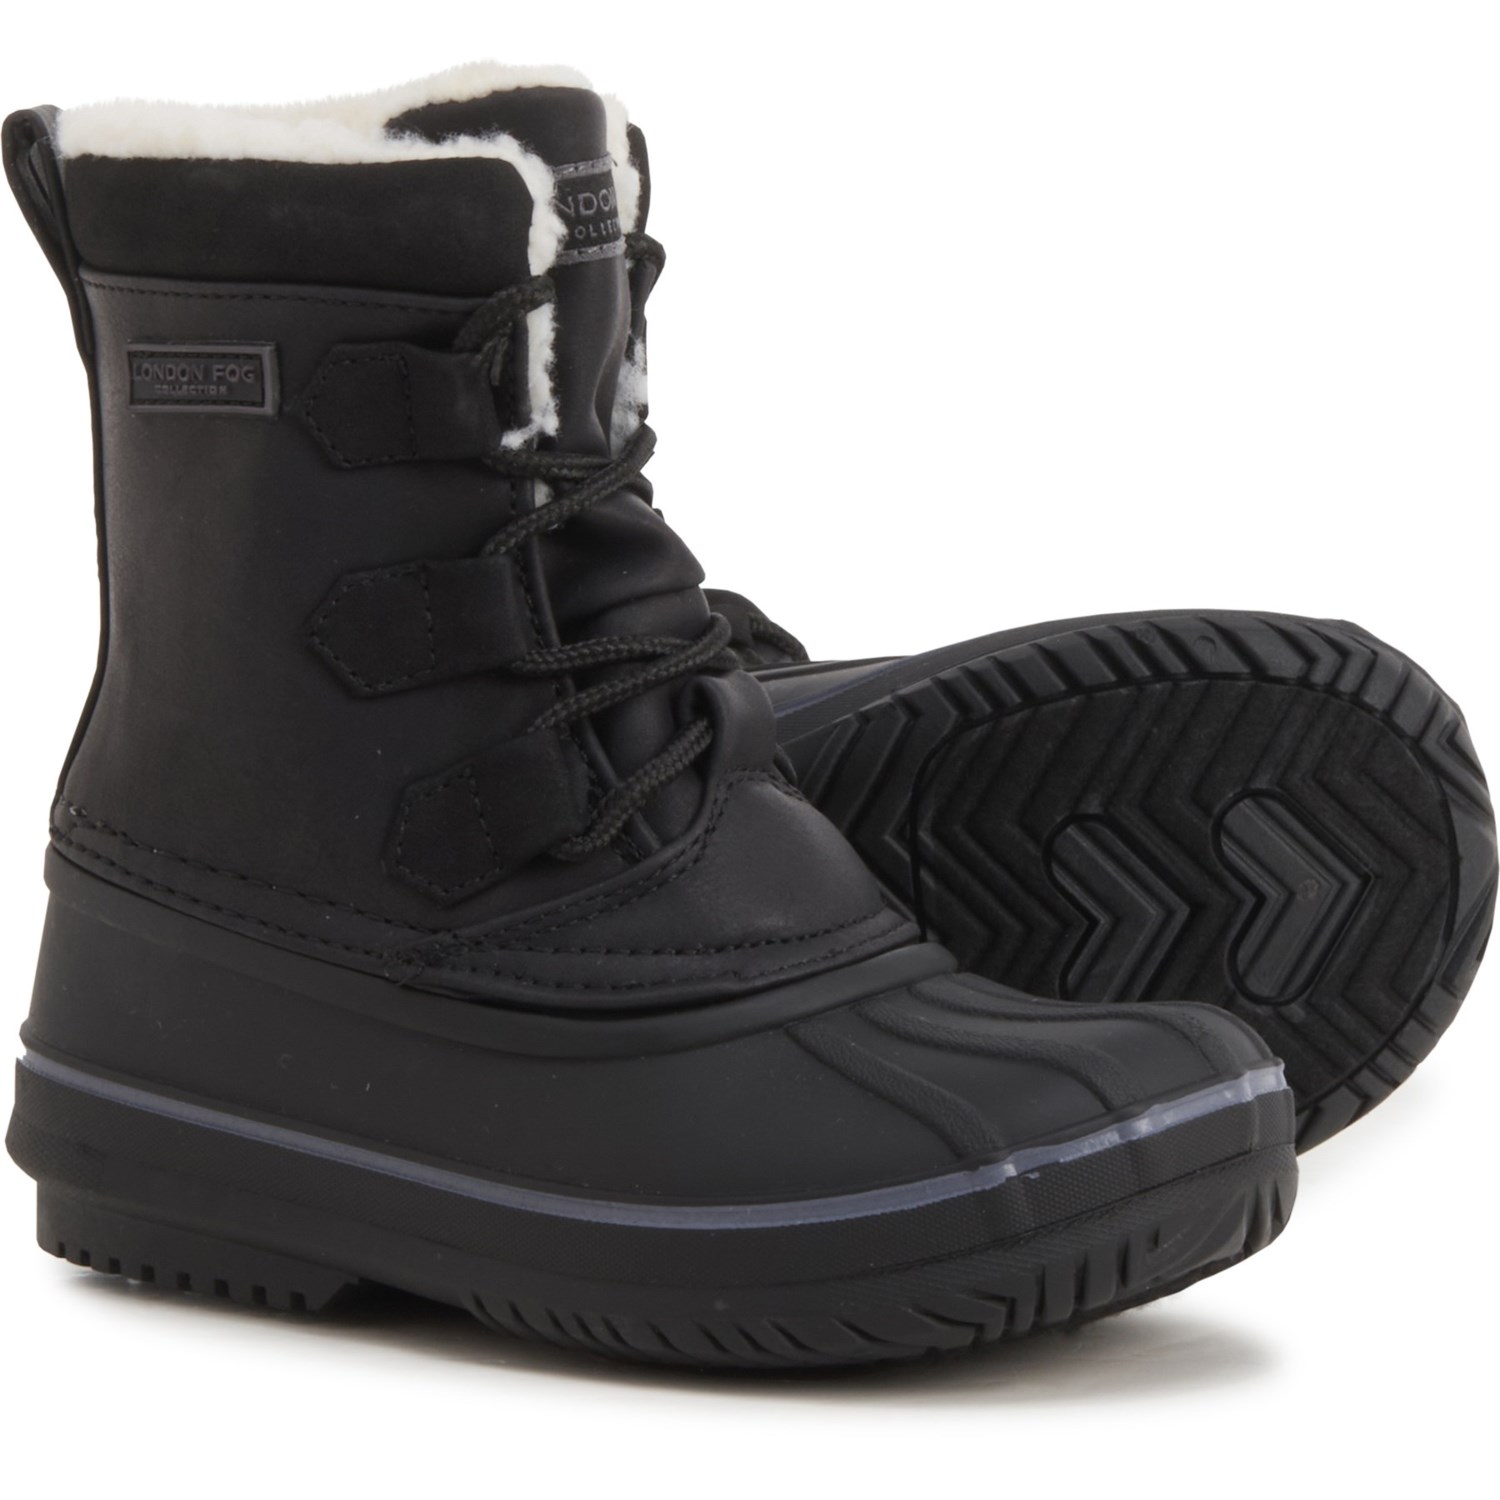 London Fog Boys Cheshire Cold Weather Snow Boot 